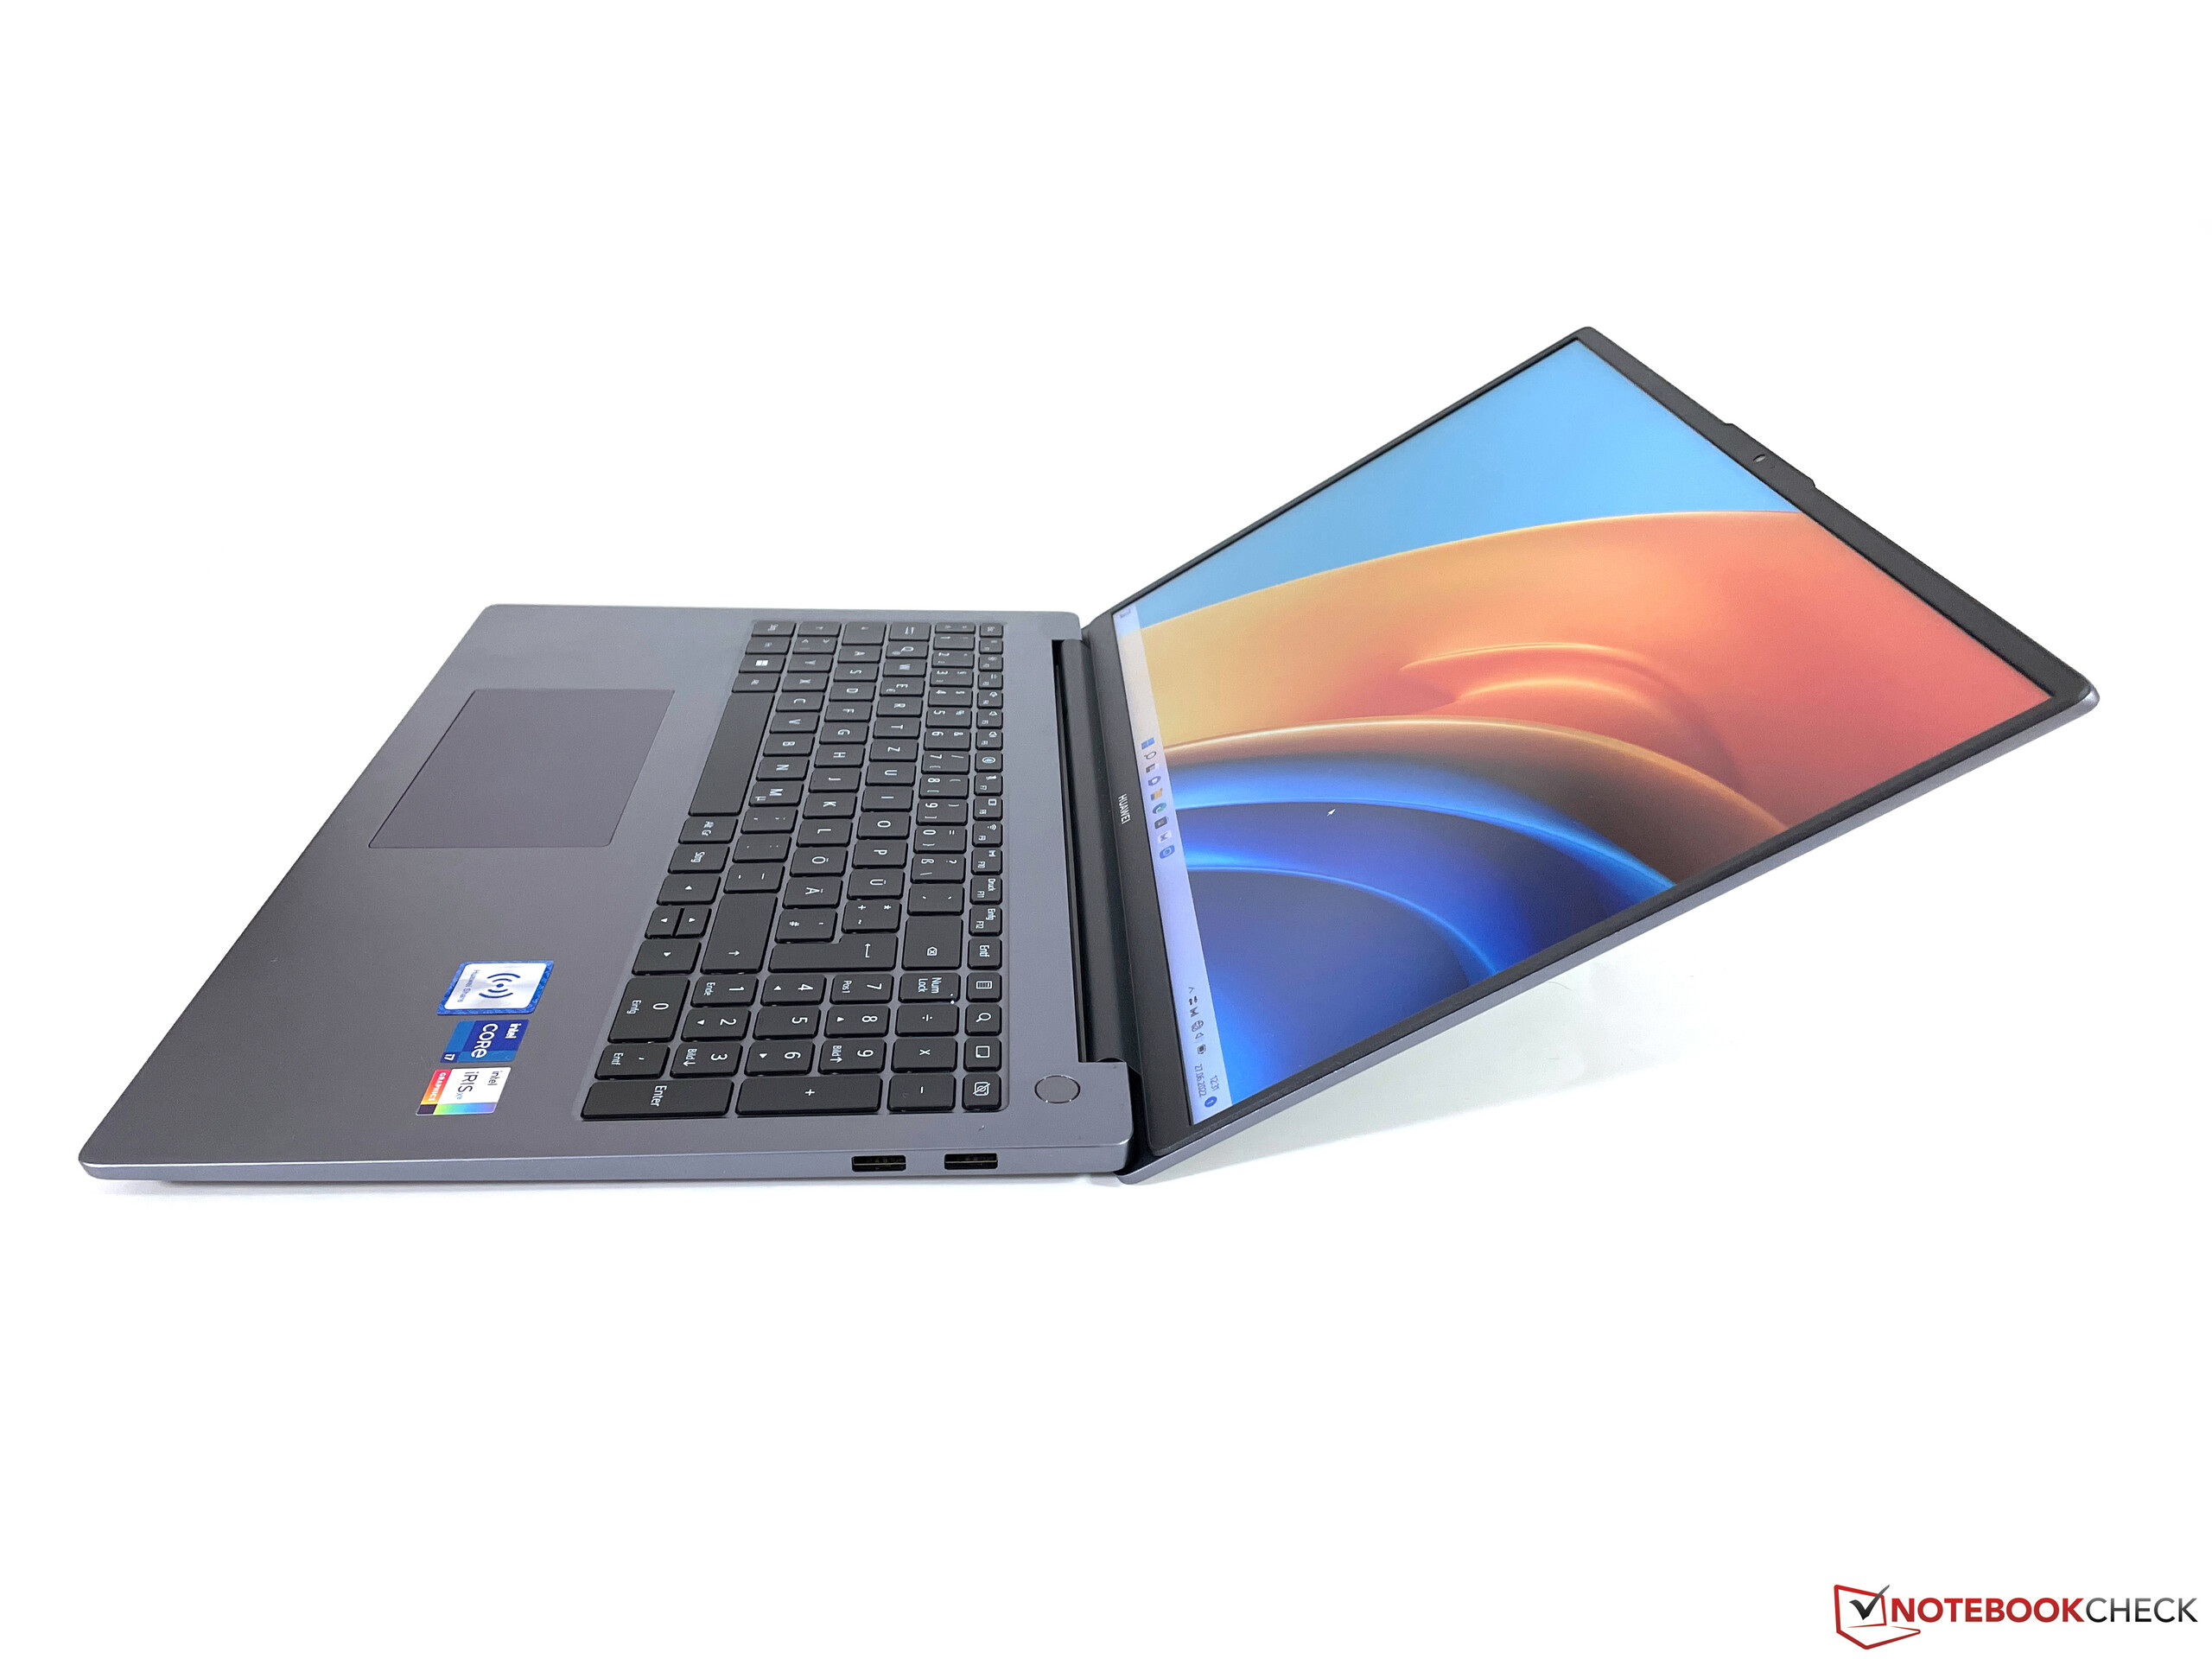 HUAWEI MateBook D16 (2022): NEWLY LAUNCHED! Even MORE POWER!🔥 